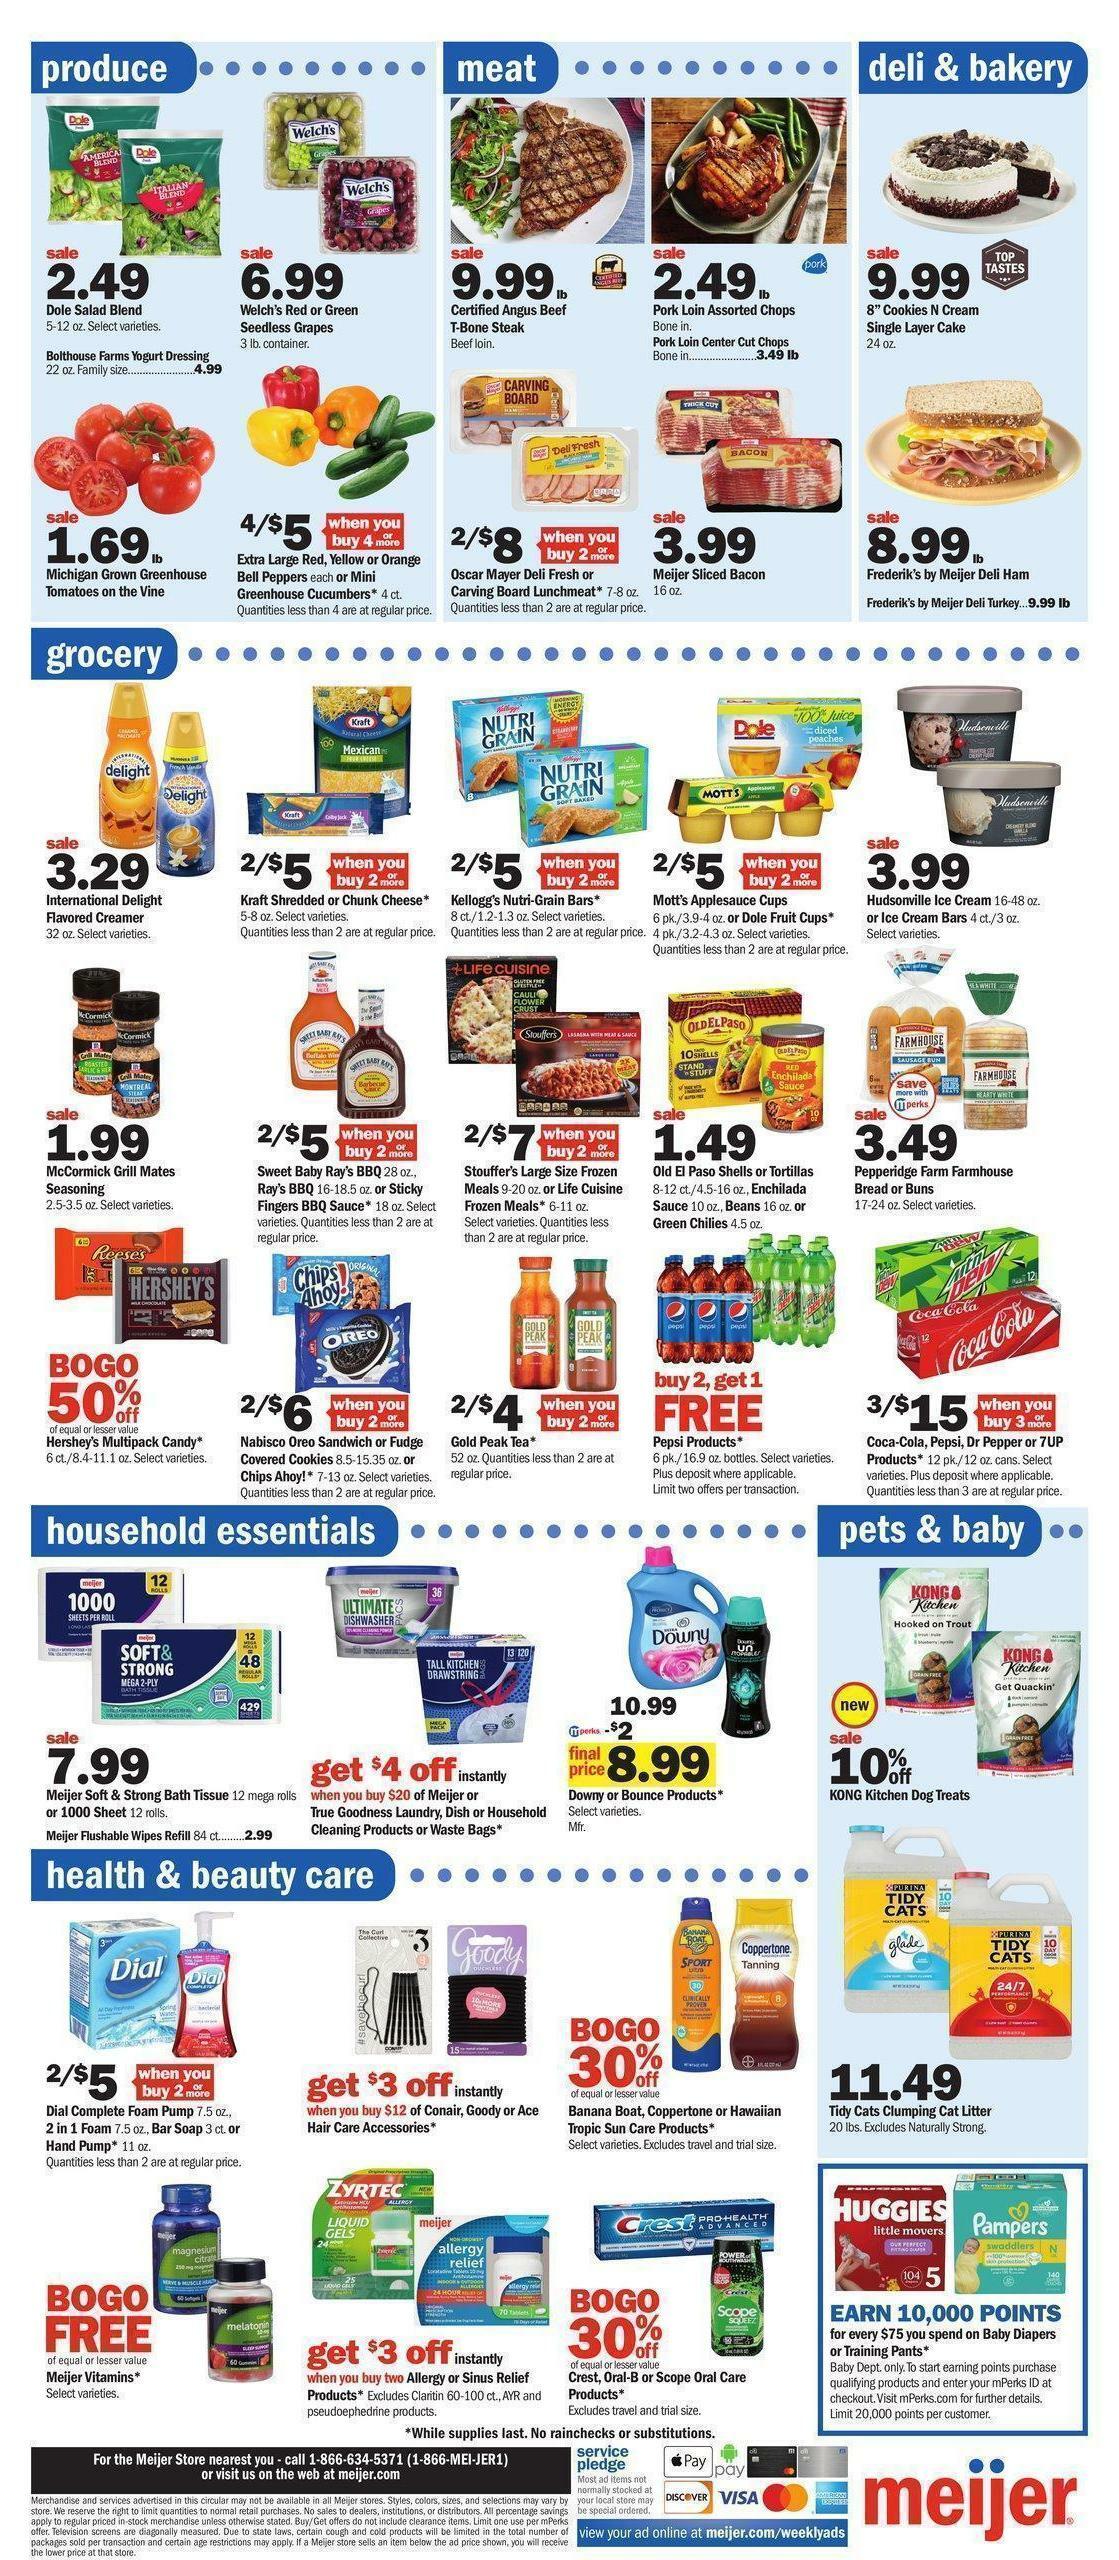 Meijer Weekly Ad from April 23